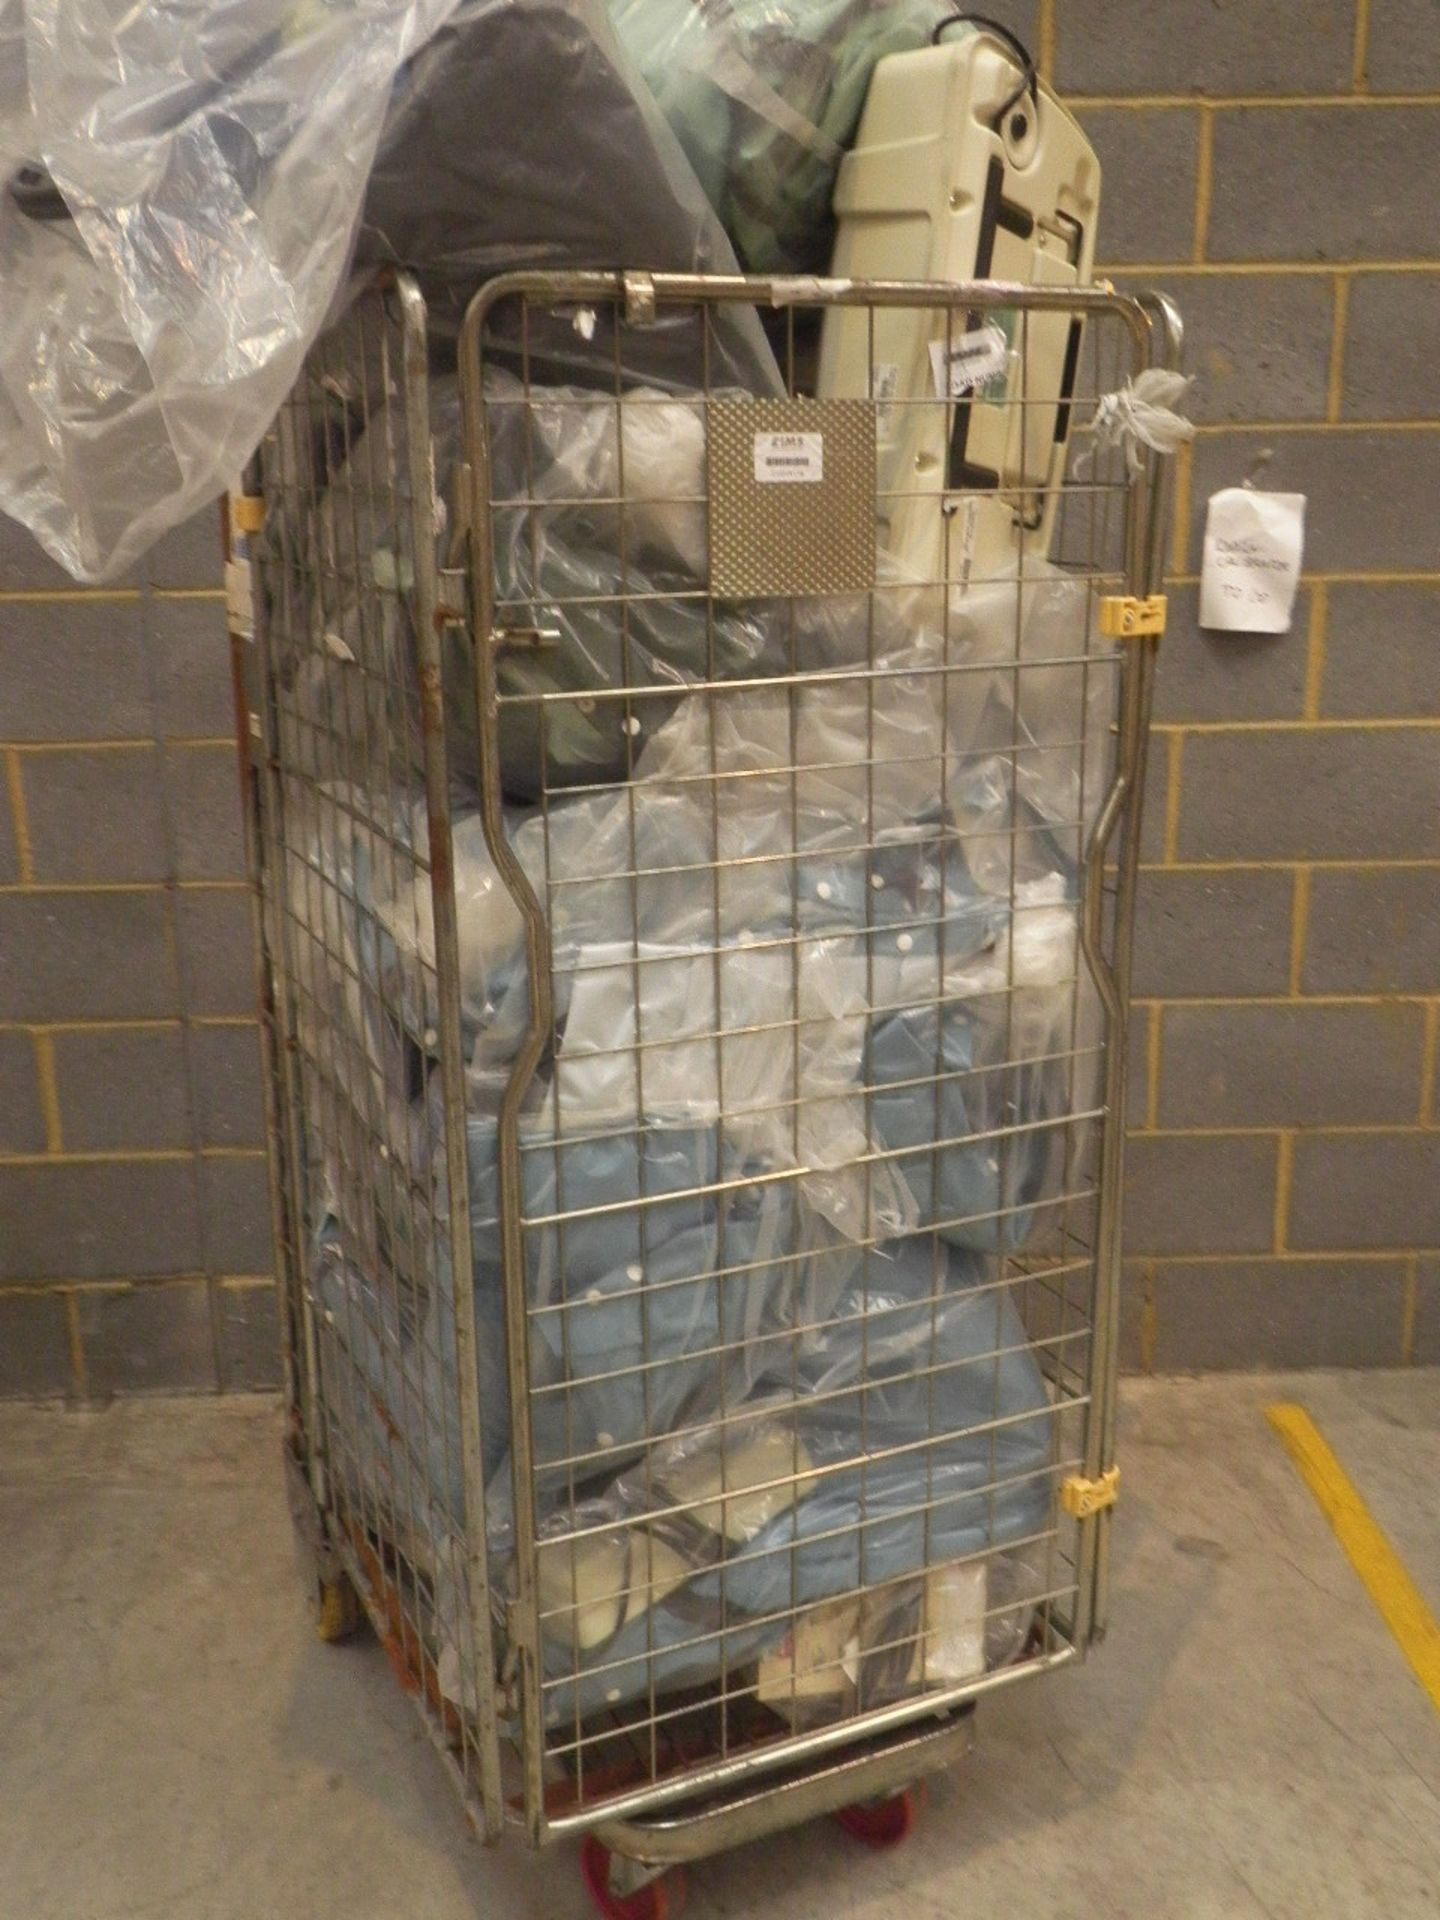 Cage Of Variable Pressure Mattresses With Pumps *Cage Not Included*